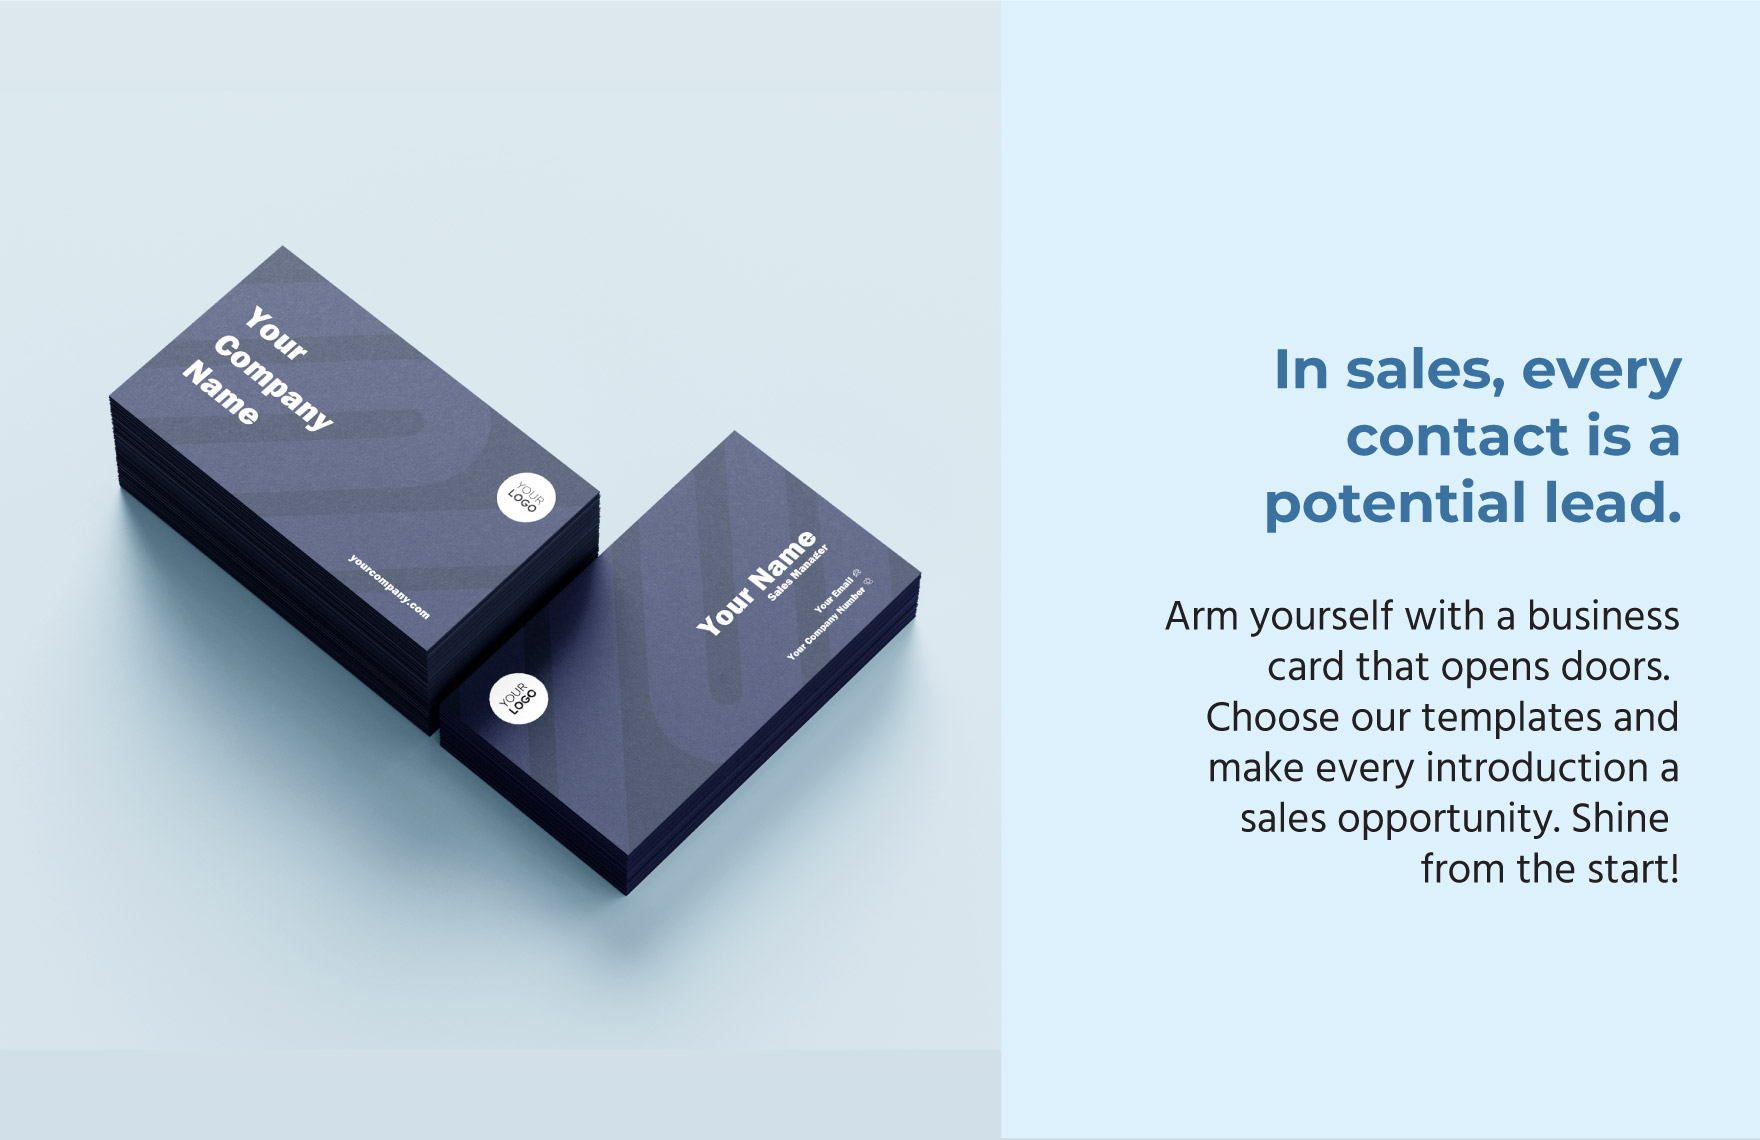 Sales Manager Business Card Template